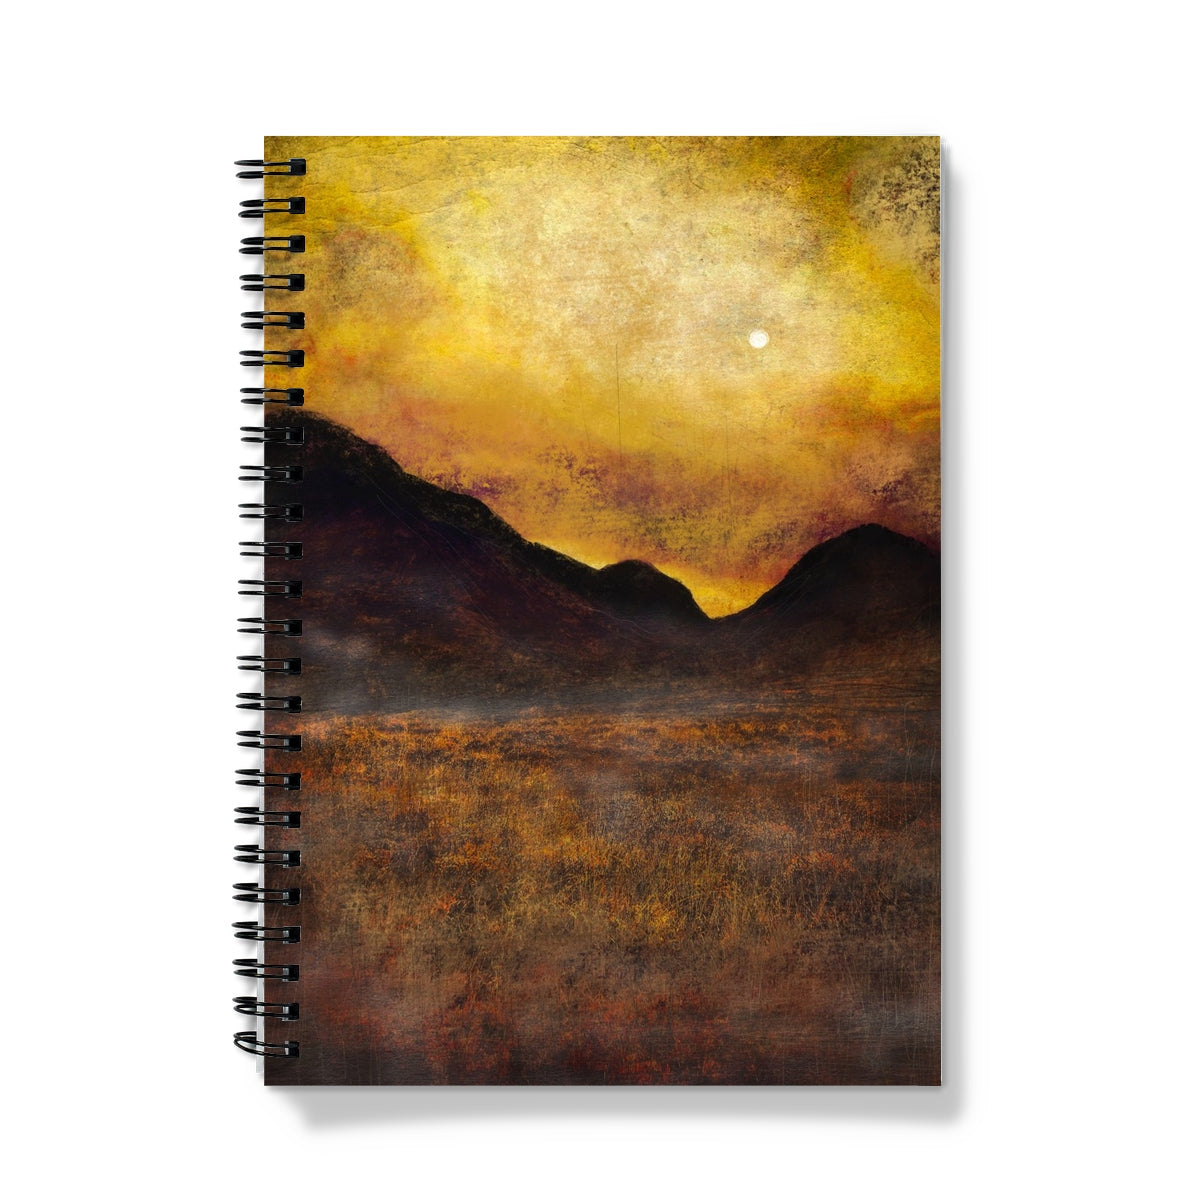 Glencoe Moonlight Art Gifts Notebook-Journals & Notebooks-Glencoe Art Gallery-A4-Lined-Paintings, Prints, Homeware, Art Gifts From Scotland By Scottish Artist Kevin Hunter